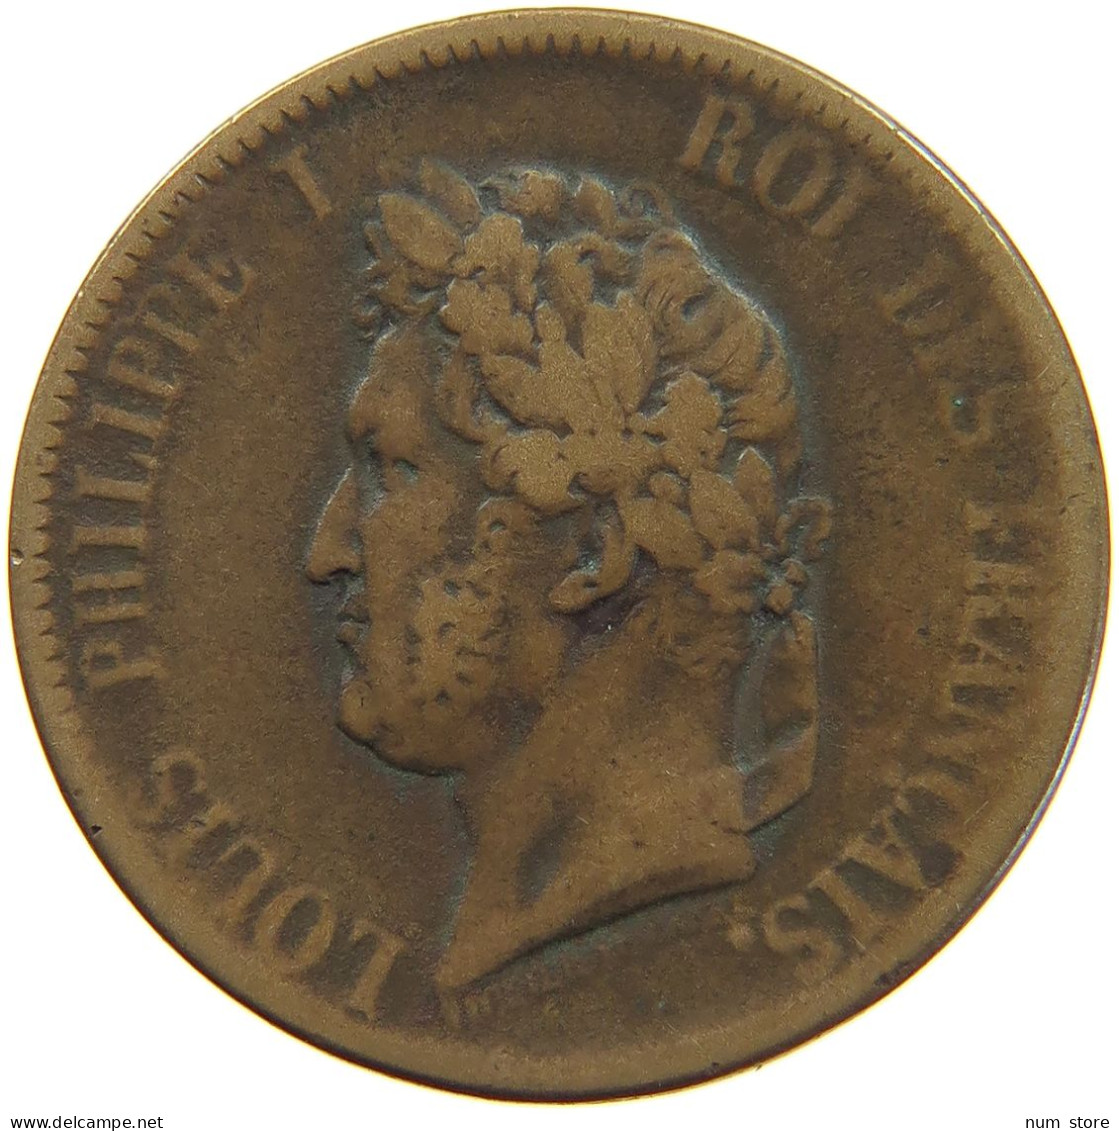 FRENCH COLONIES 5 CENTIMES 1839 A LOUIS PHILIPPE I. (1830-1848) #c061 0061 - French Colonies (1817-1844)